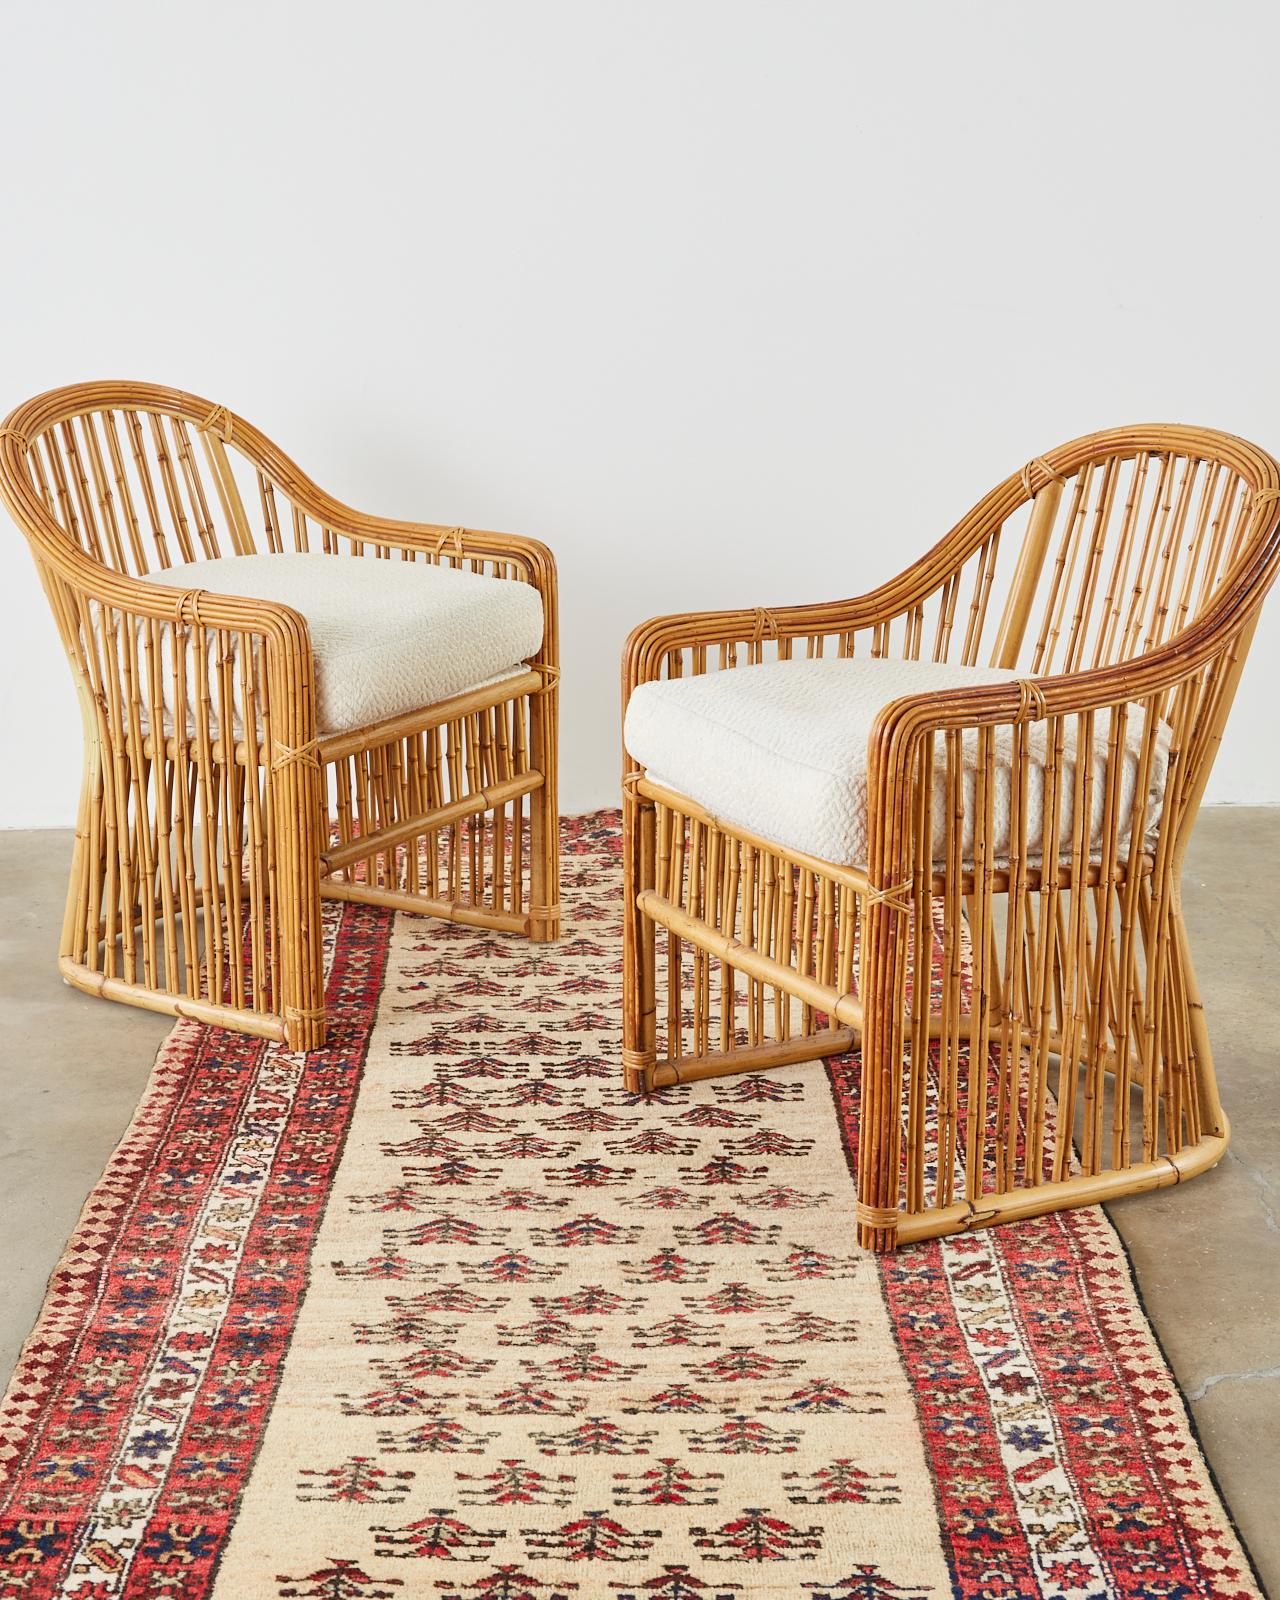 Distinctive antique runner from the northwest Persian area of Ardabil Provence. Featuring an antique design with tree of life style symbols on the camel colored field and repeating geometric borders.